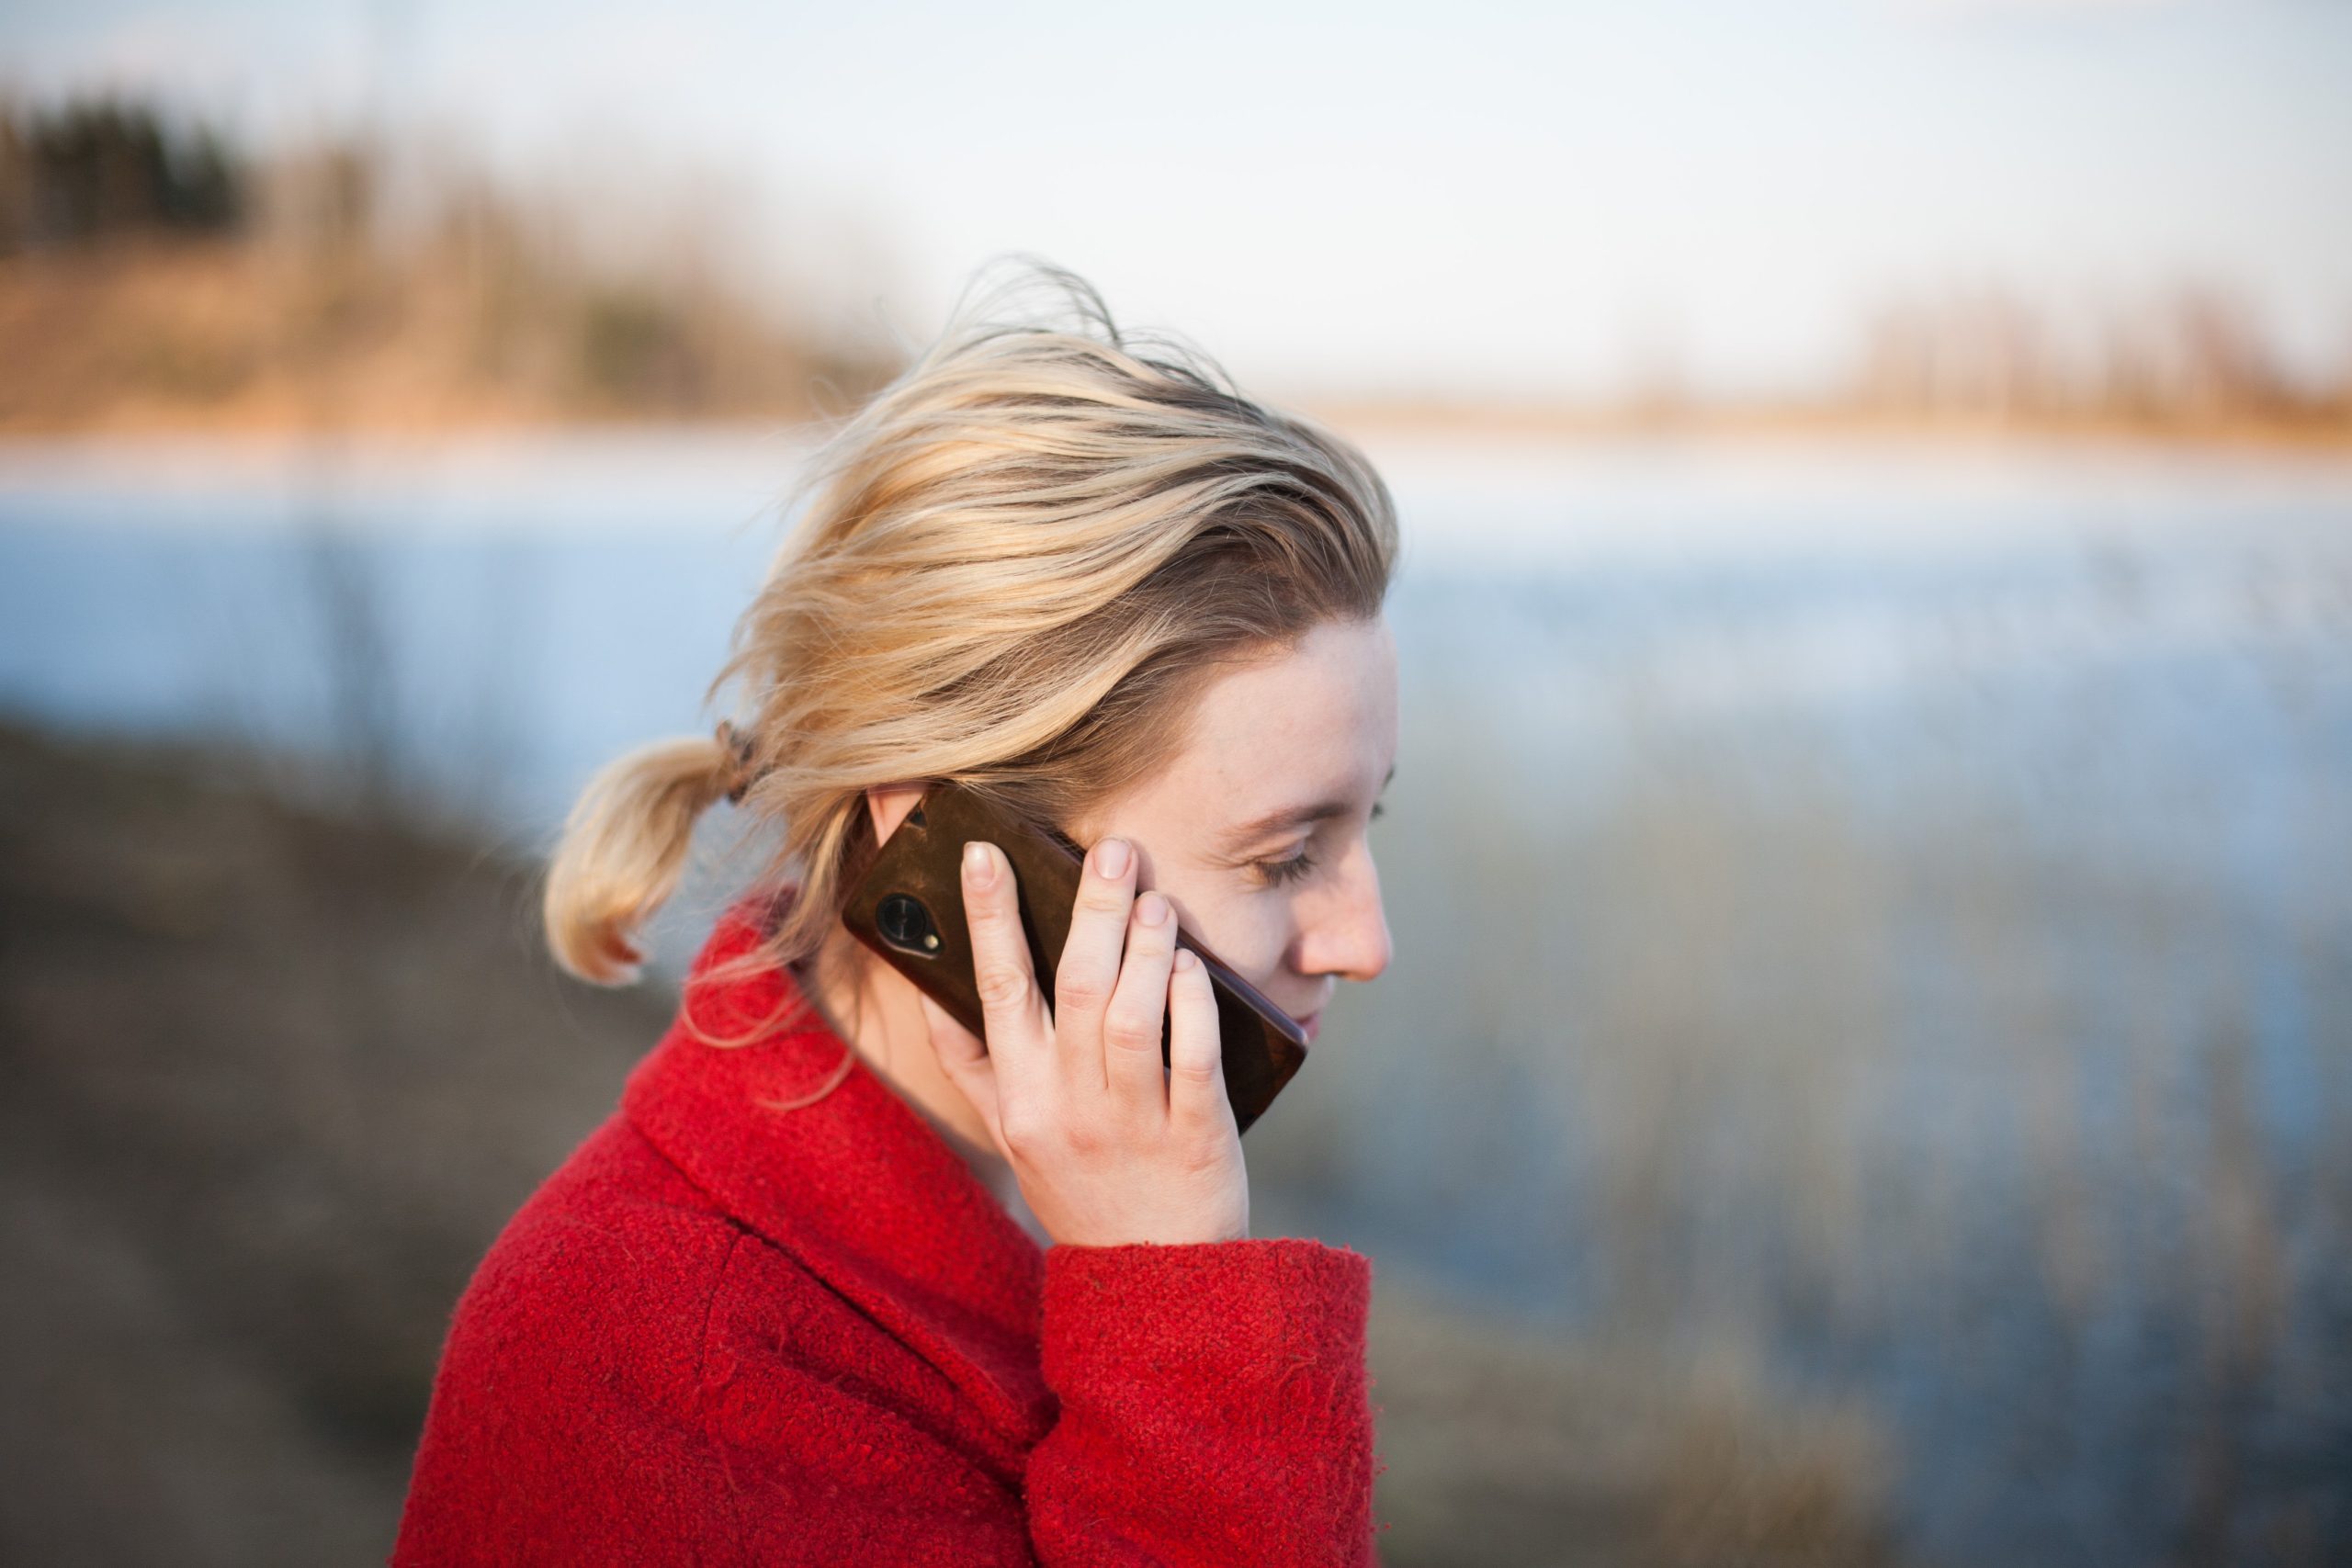 Woman outside holding a cell phone to her ear.